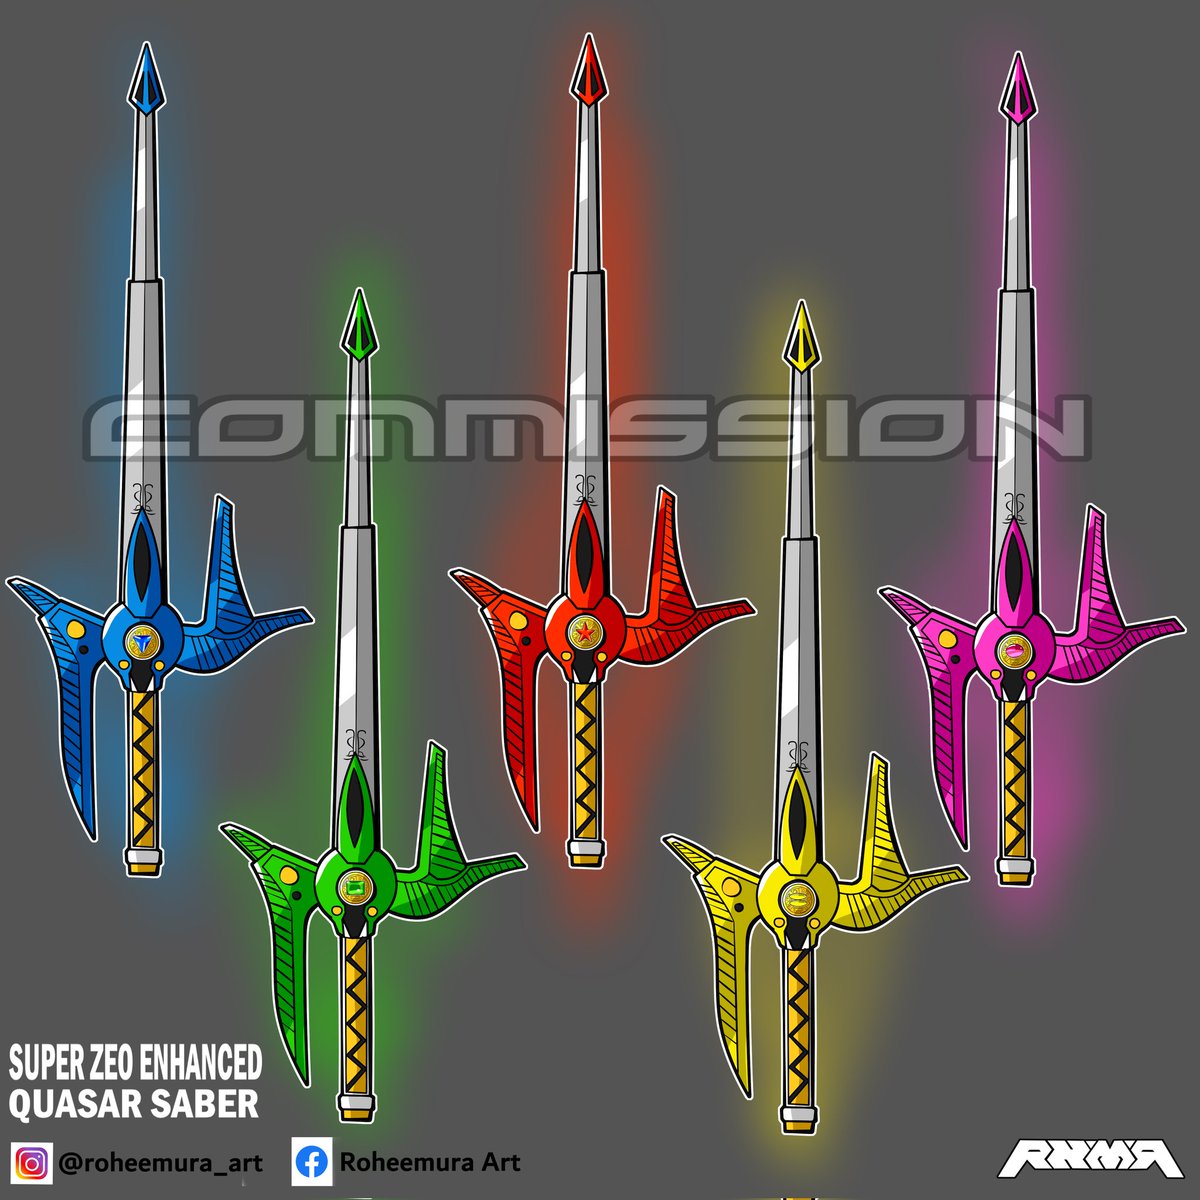 Commission for IG friend. Super Zeo Enhanced Quasar Saber. So basically quasar saber (from lost galaxy, upgrade with zeo power)
#PowerRangers30 #PowerRangers #powerrangerszeo #powerrangerslostgalaxy #powerrangersoncealways